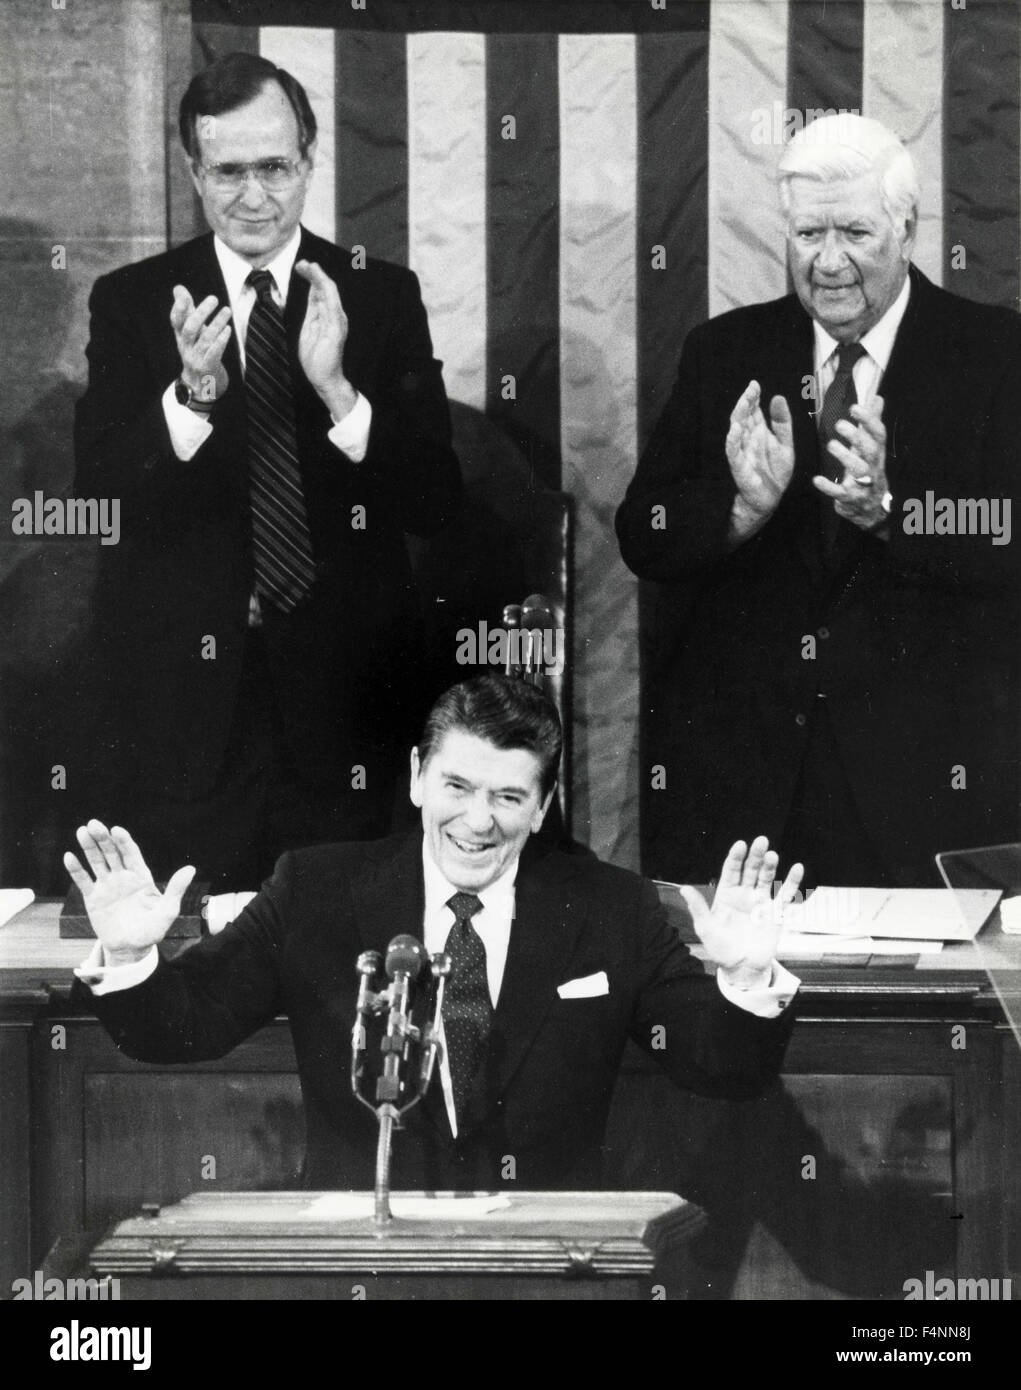 U.S. President Ronald Reagan applauded by Speaker Thomas Tip O'Neill and Vice President George Bush during the State of the Union, Washington, USA Stock Photo